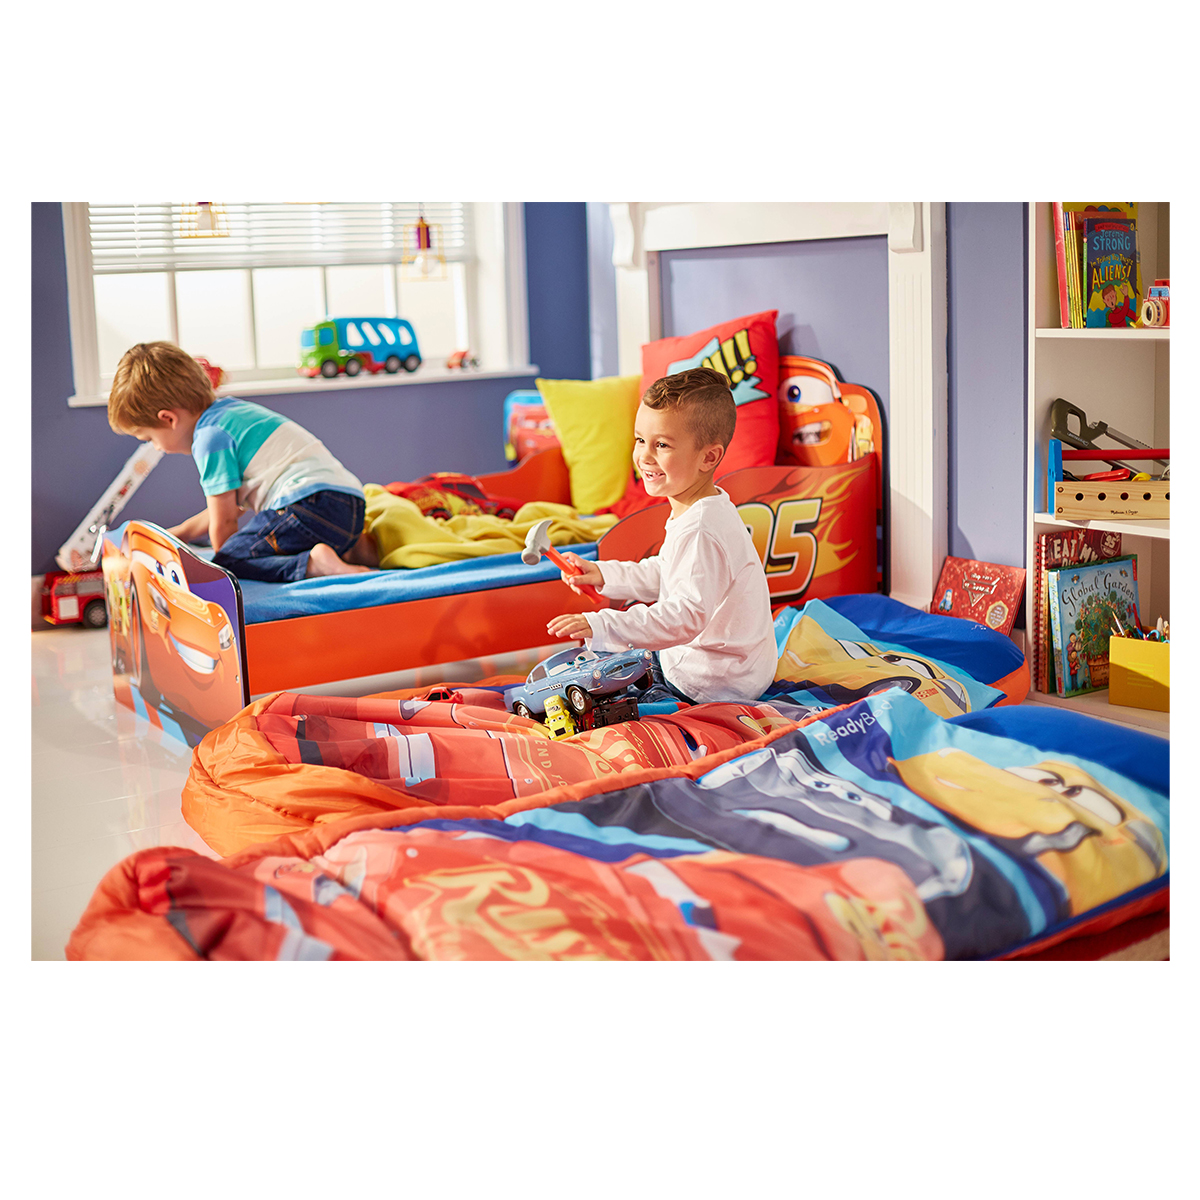 Junior ReadyBed - kids sleeping bag and airbed in one - Spider-Man Stop  Motion Video on Vimeo